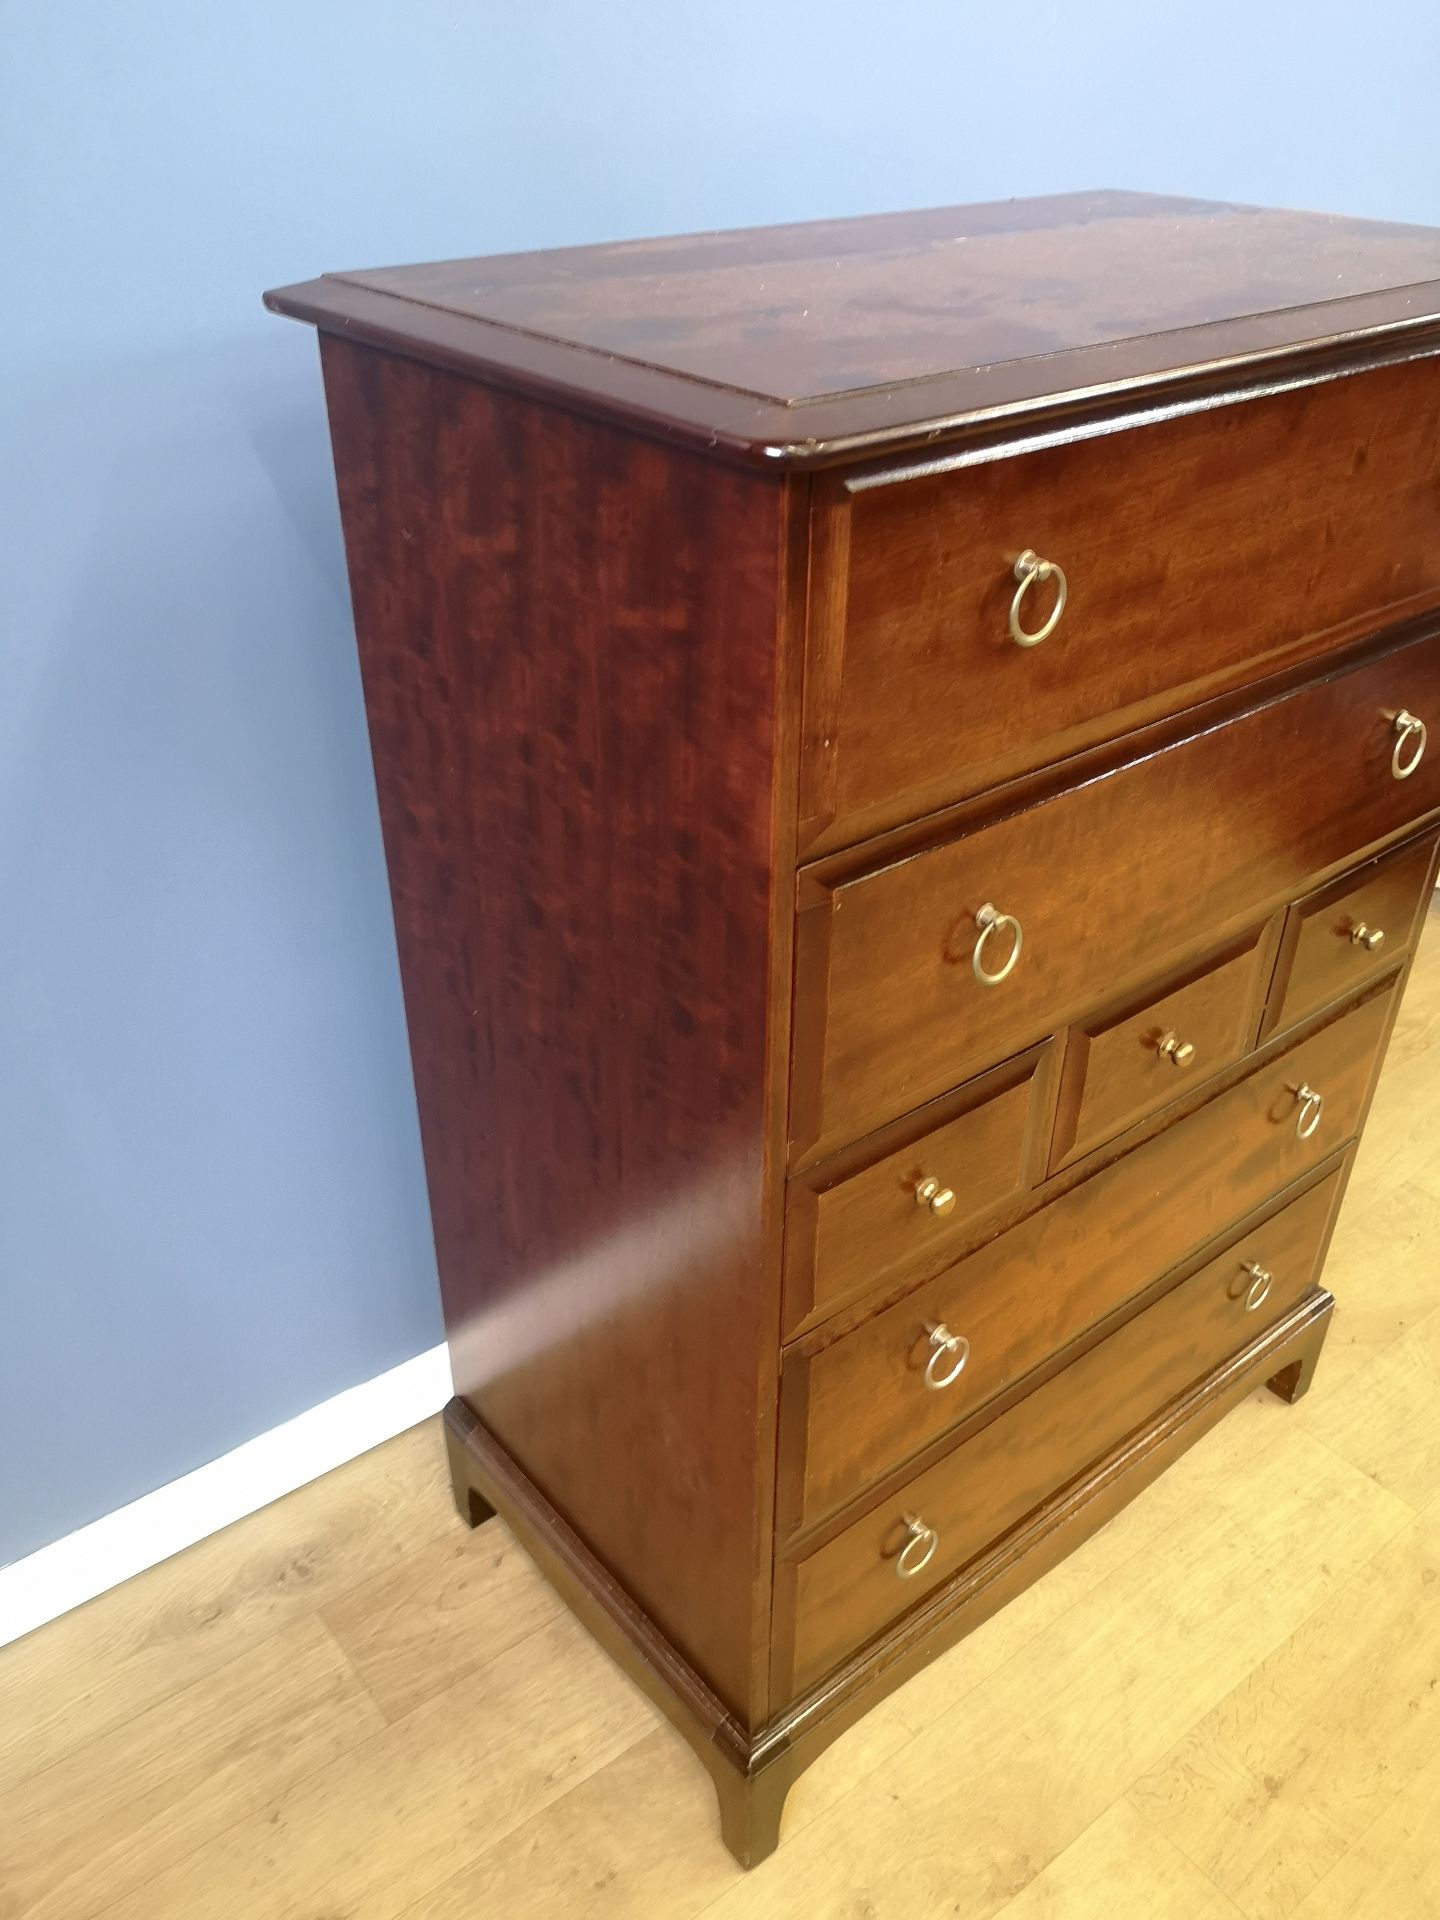 Stag chest of drawers - Image 3 of 6